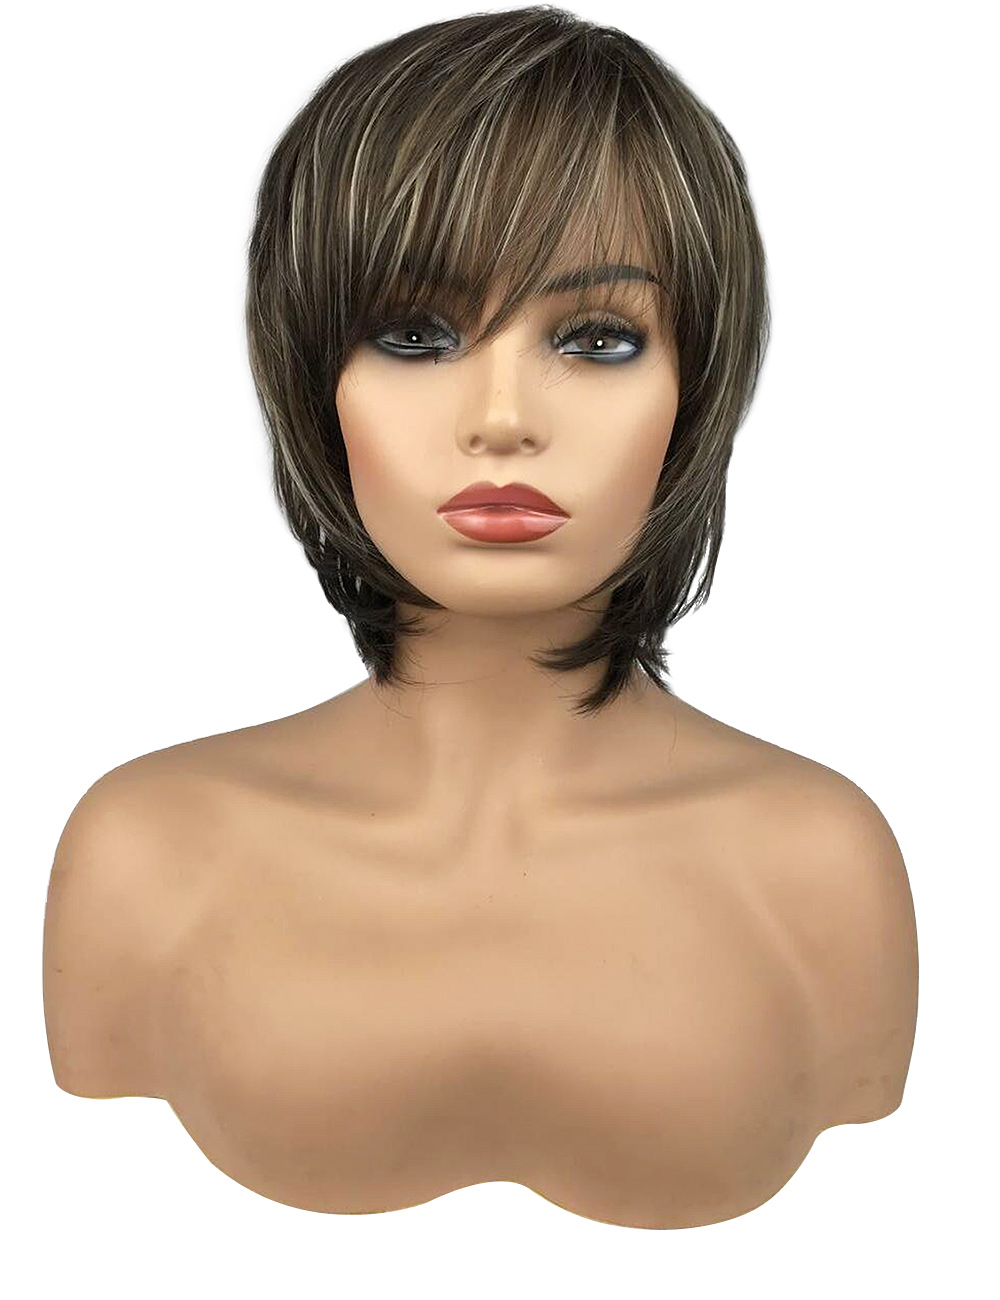 Women's Short Bob Style Straight Synthetic Hair Wigs With Bangs Capless Wigs 10inch